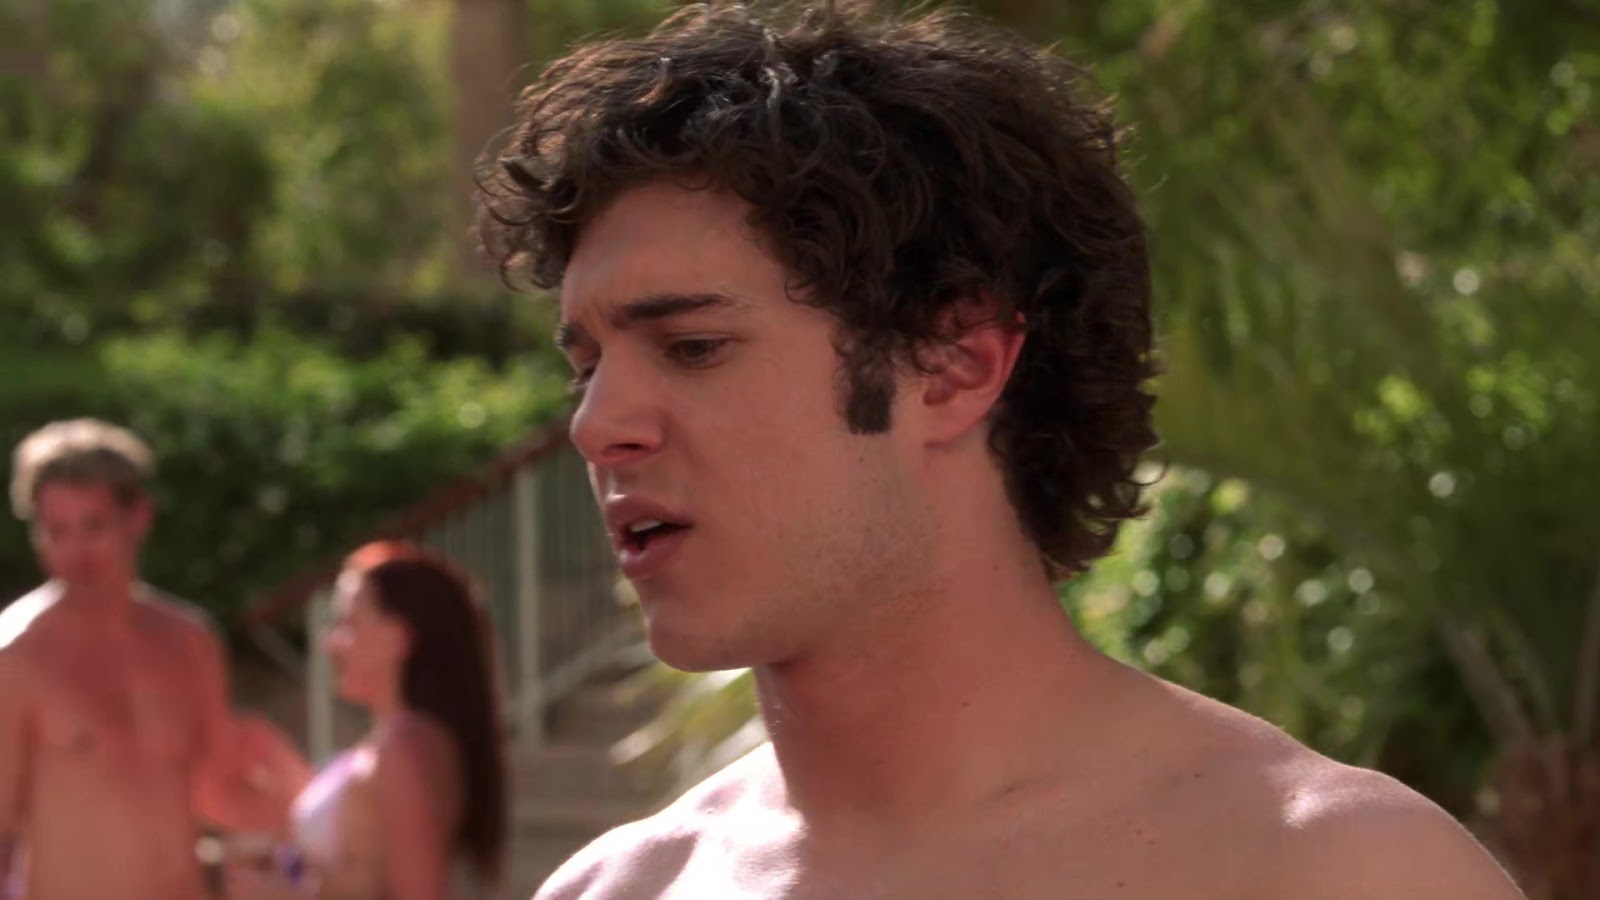 Adam Brody shirtless in The OC 1-26 "The Strip" .